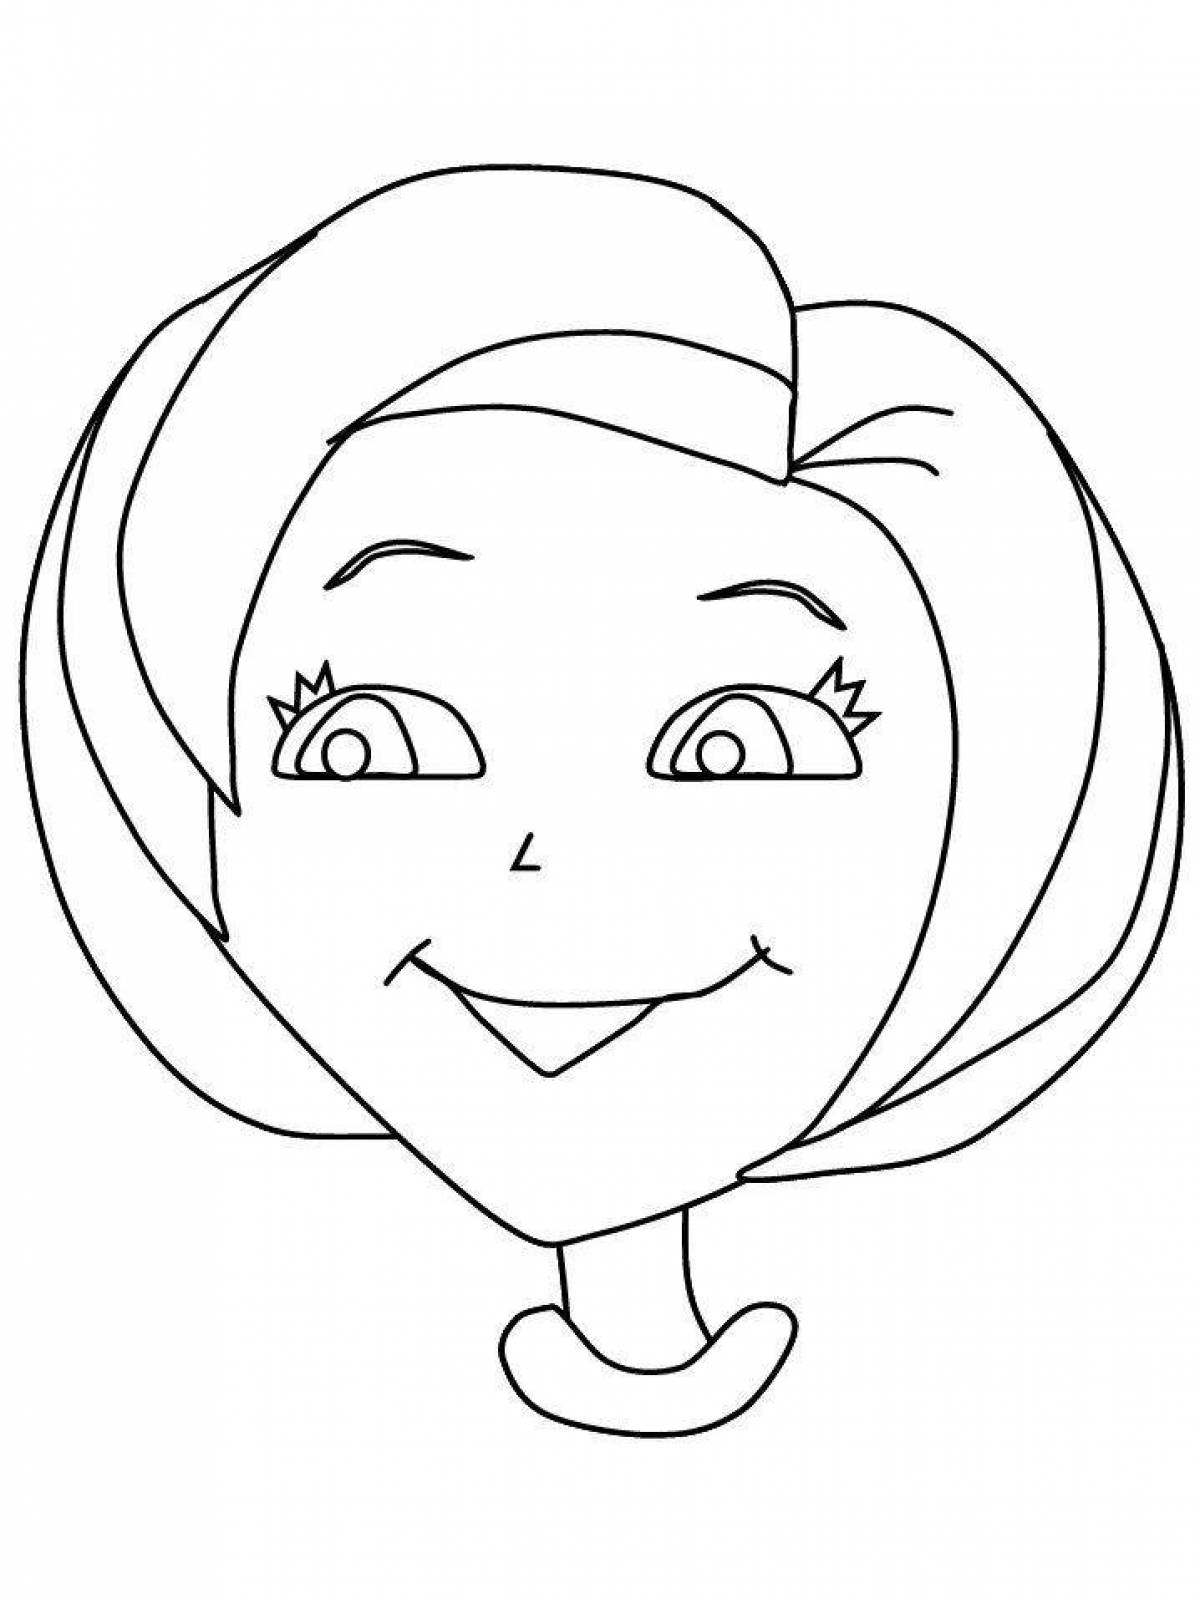 Jocular coloring page face for kids